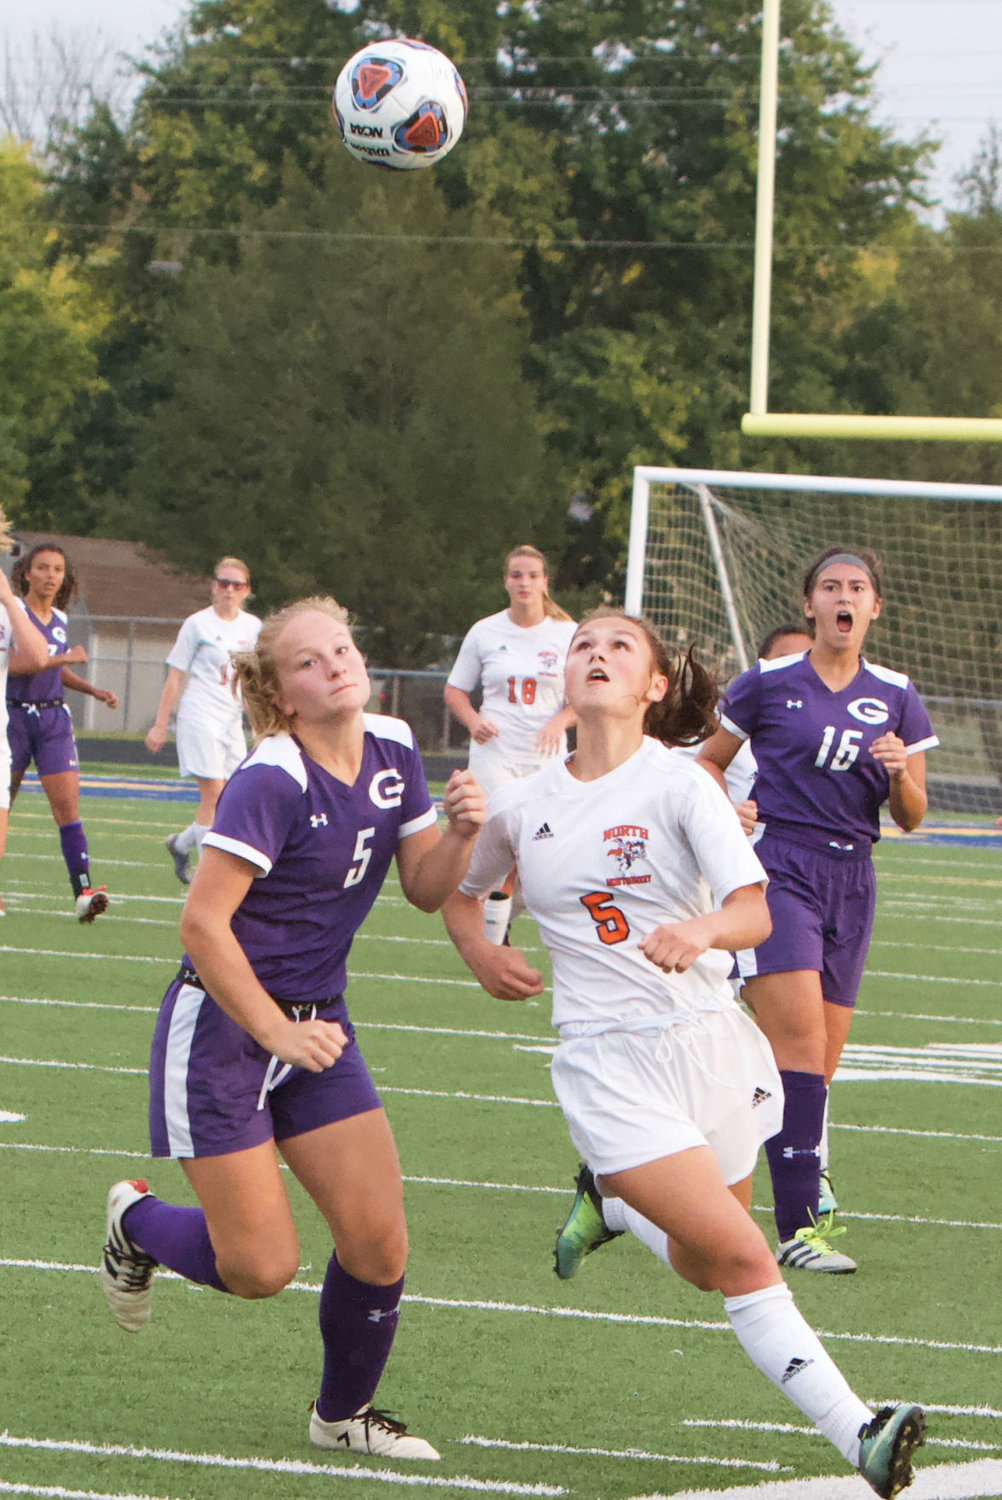 North Montgomery's Teegan Bacon fights for the ball with Greencastle's Elise Lausee.